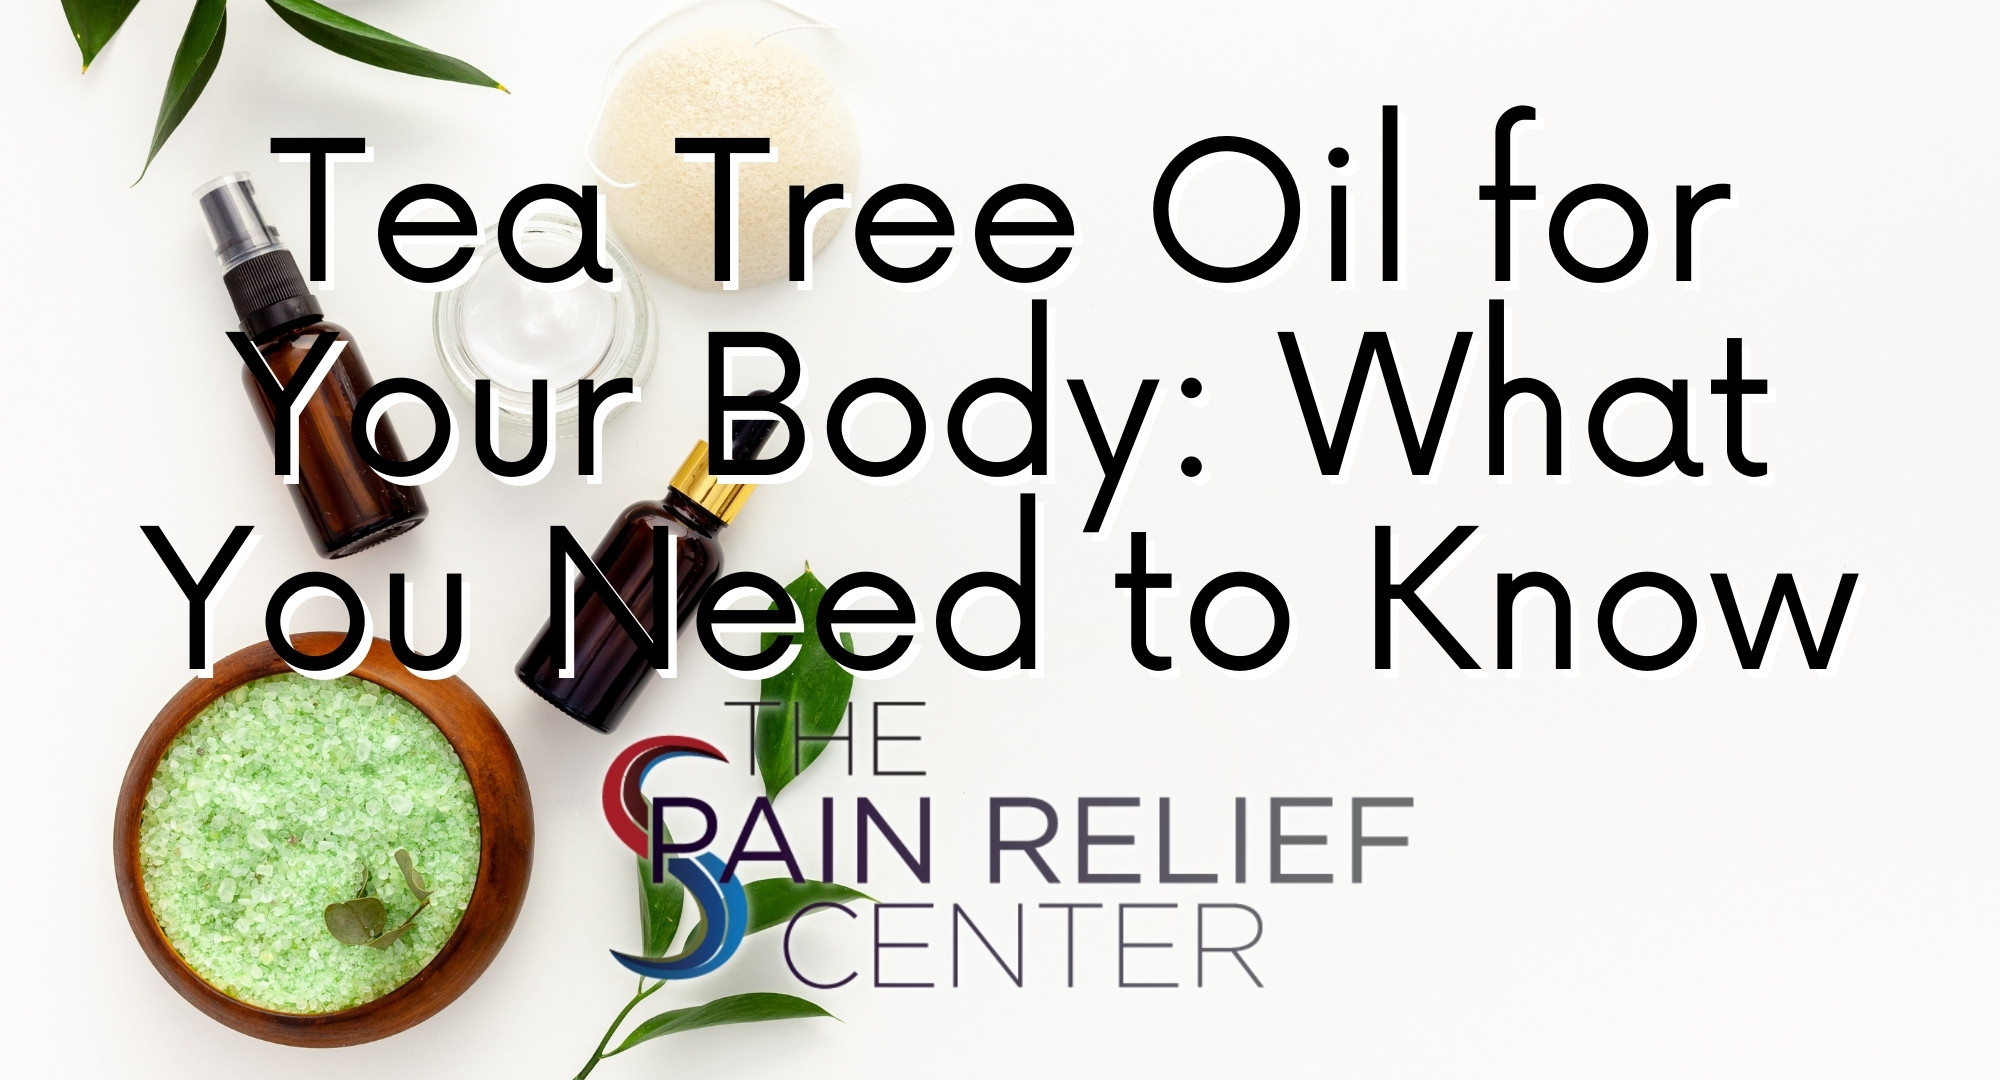 Tea tree oil for your body